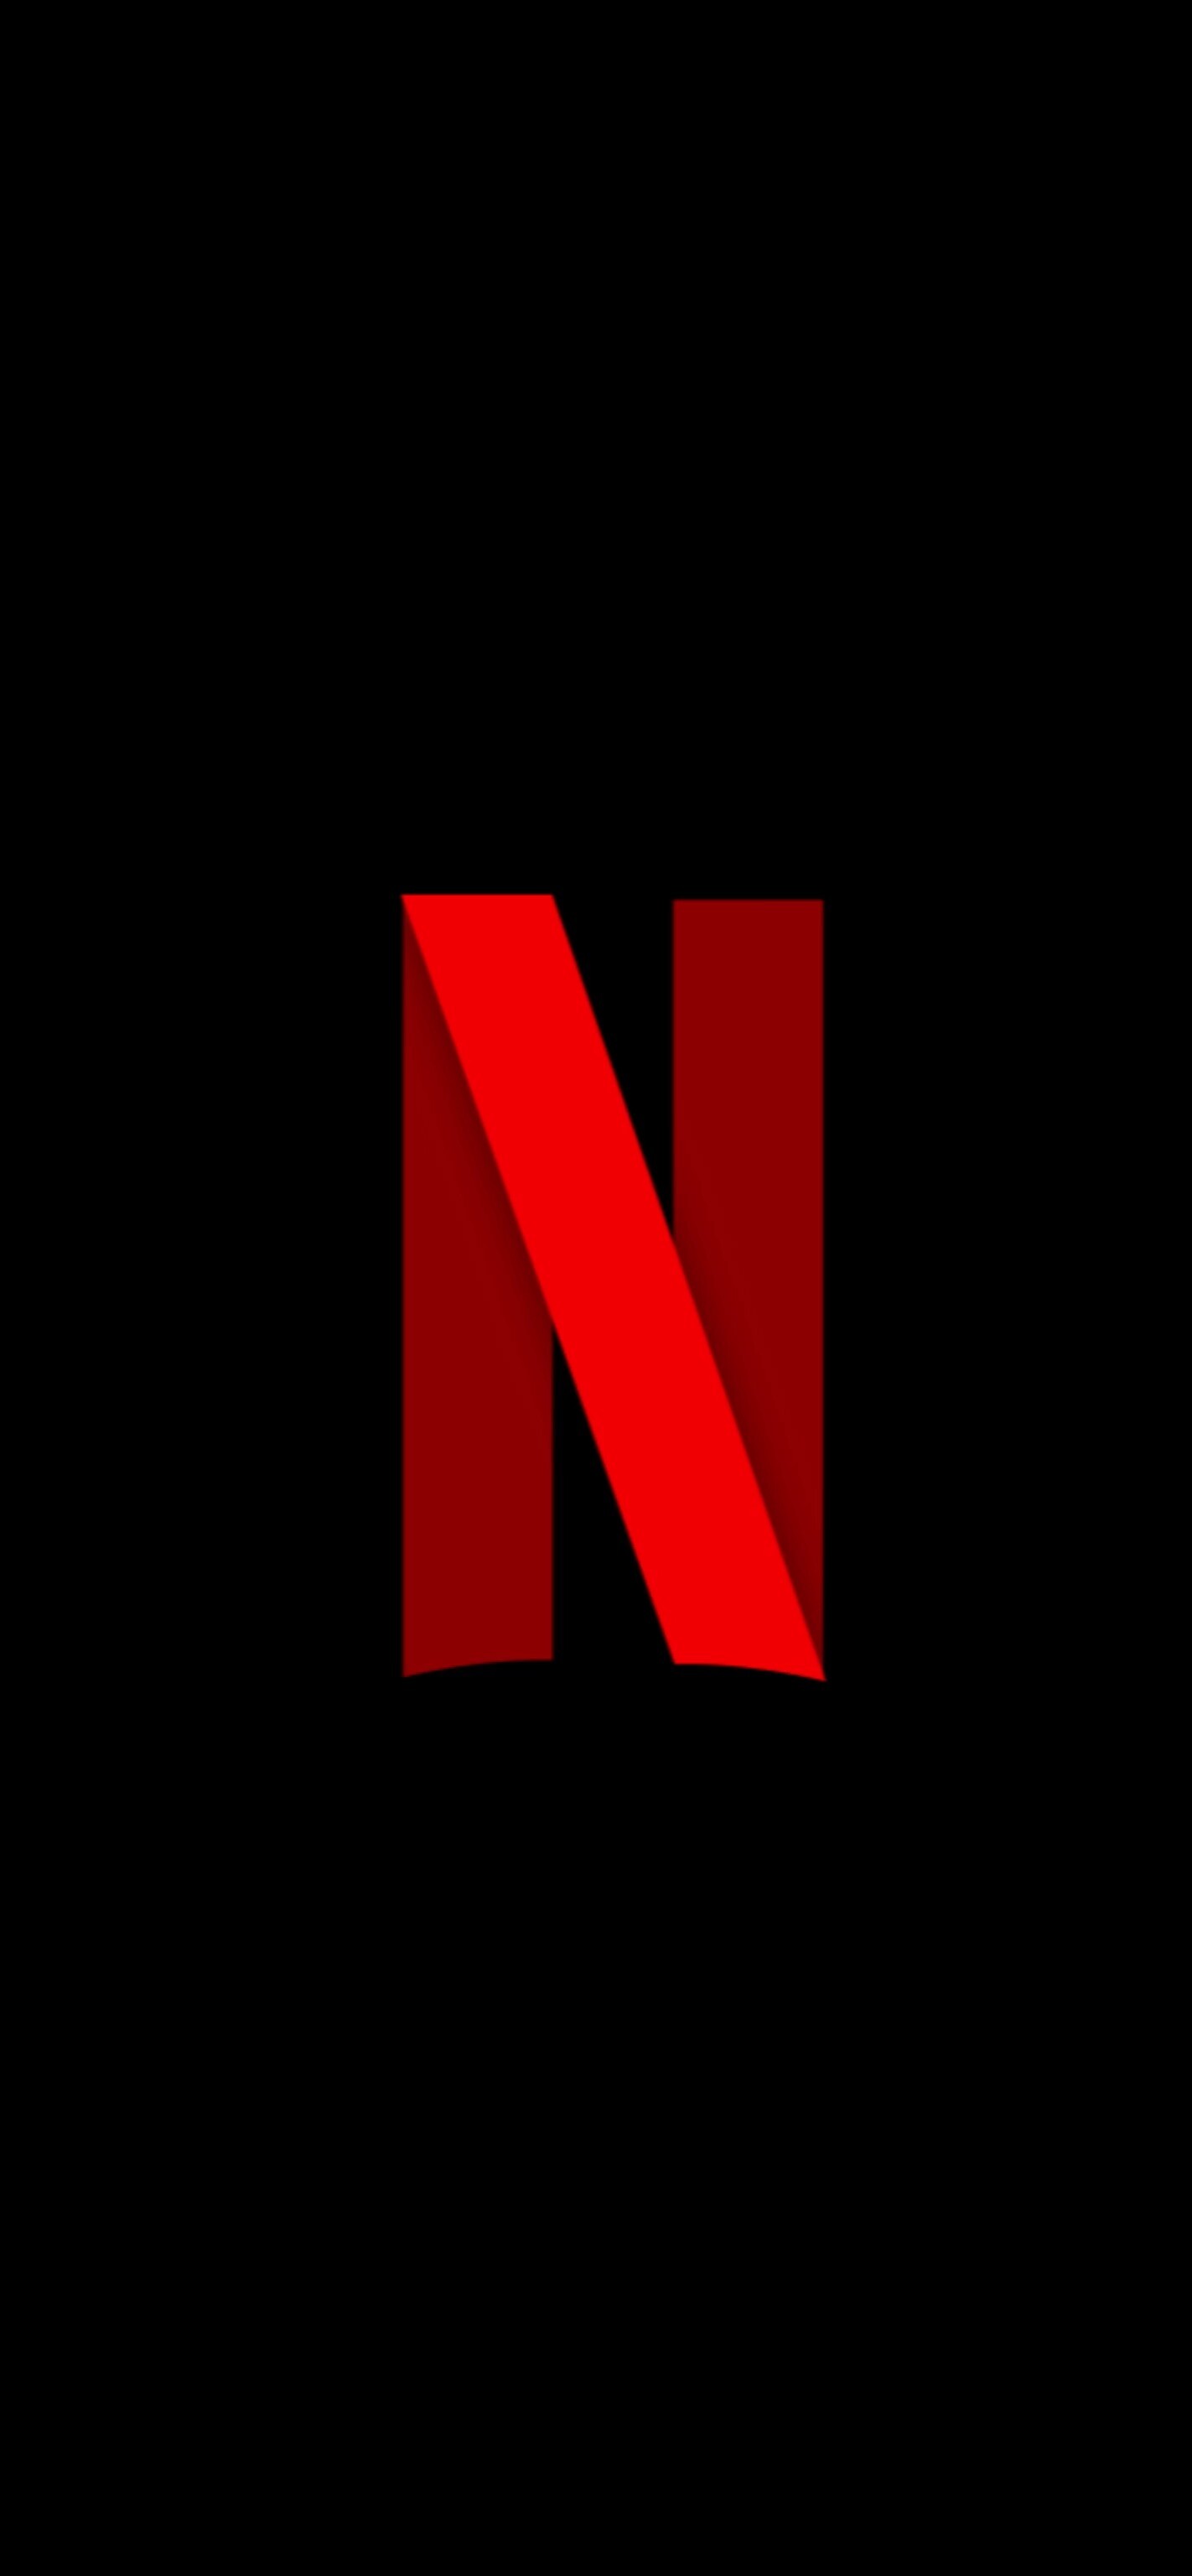 Netflix: Operates the over-the-top subscription video-on-demand service brand, which includes original films and television series commissioned or acquired by the company, and third-party content licensed from other distributors. 1430x3080 HD Background.